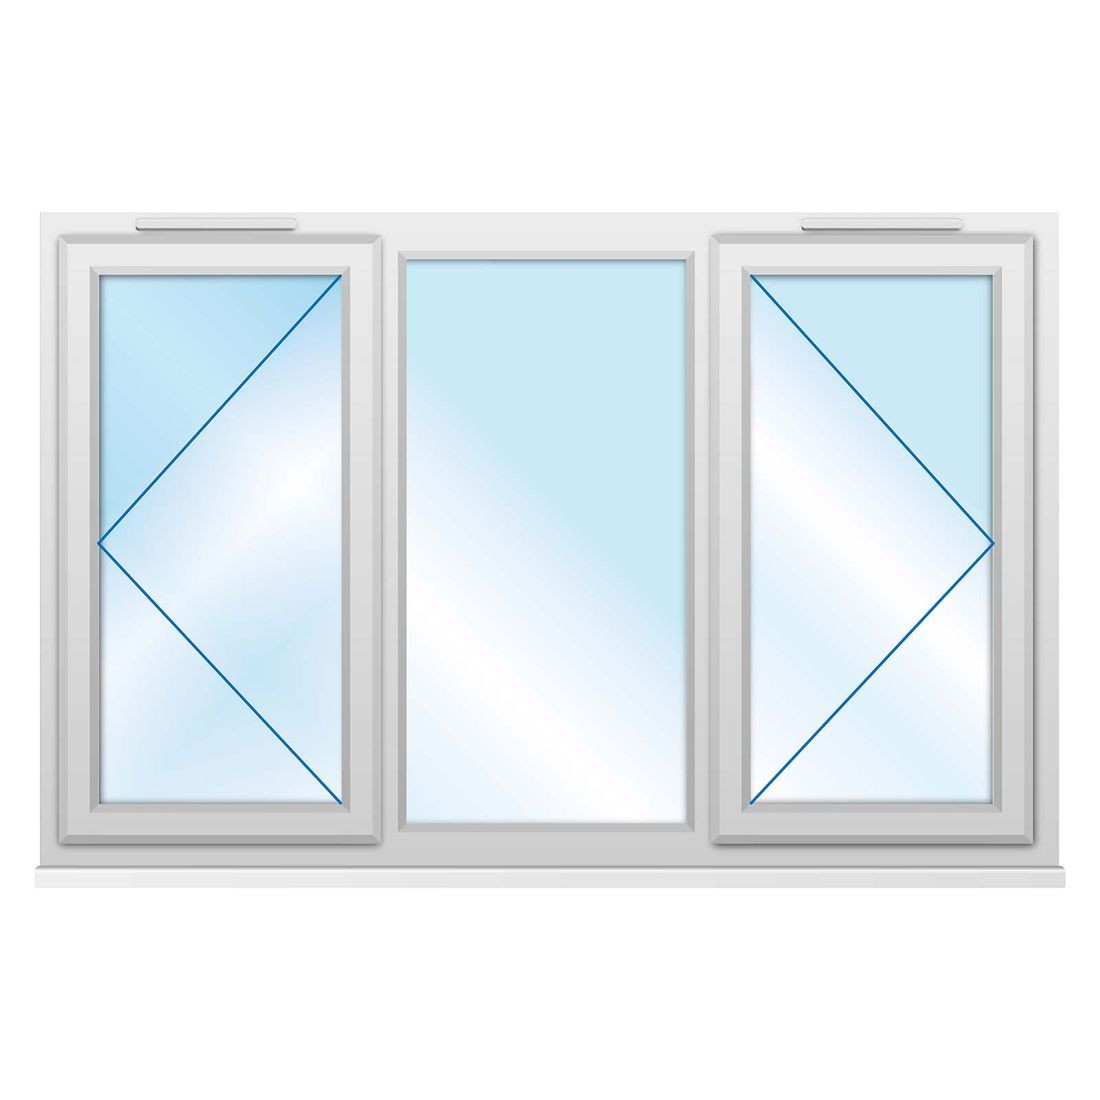 Upvc Window 1770 X 1040Mm 3P Clear Glazed A Rated